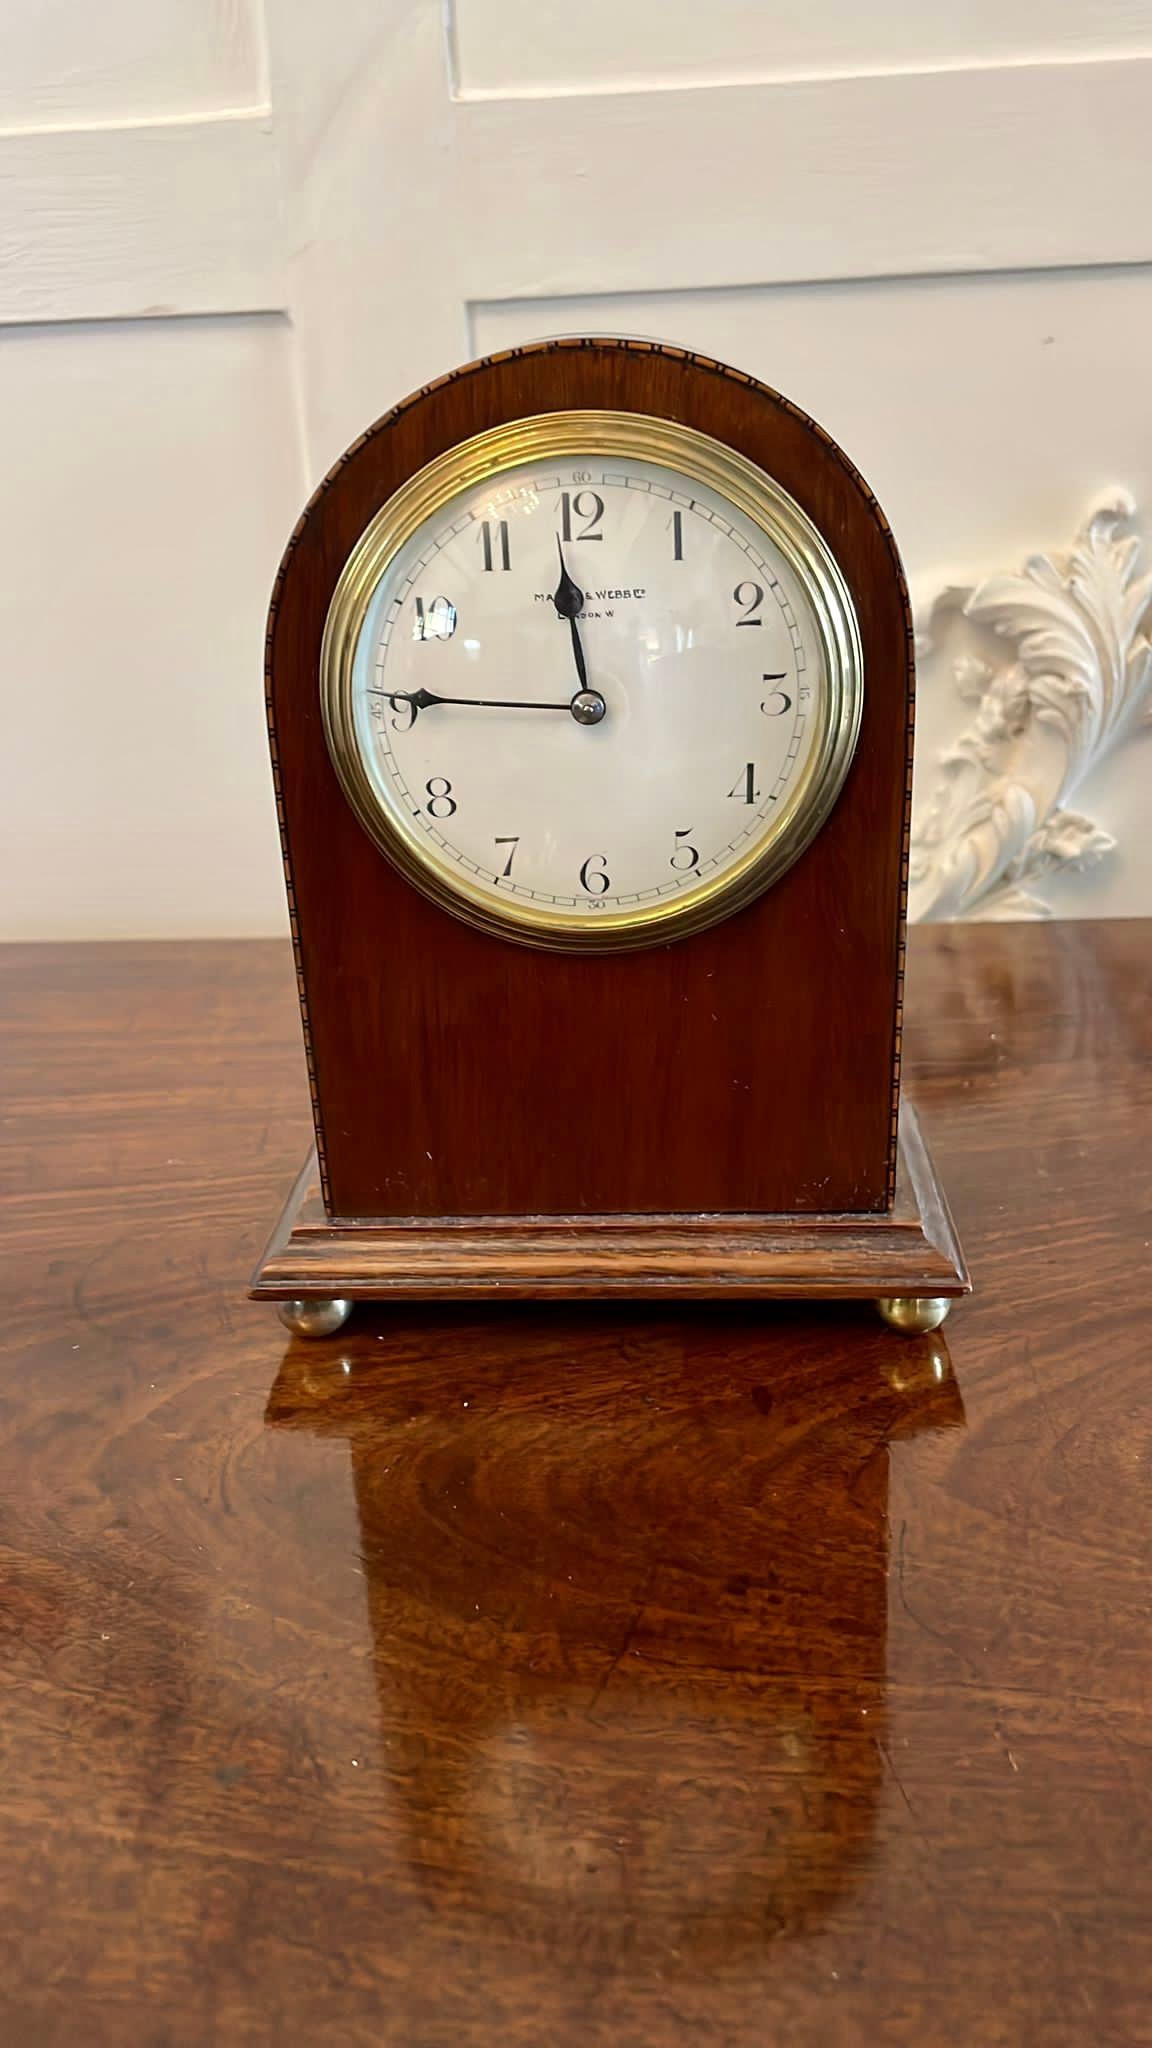 Antique mahogany inlaid mantle clock by Mappin & Webb holders of Royal Warrants to British monarchs since 1897 having a dome top case with pretty chequered inlay, porcelain face with original hands and eight day movement with original brass bezel